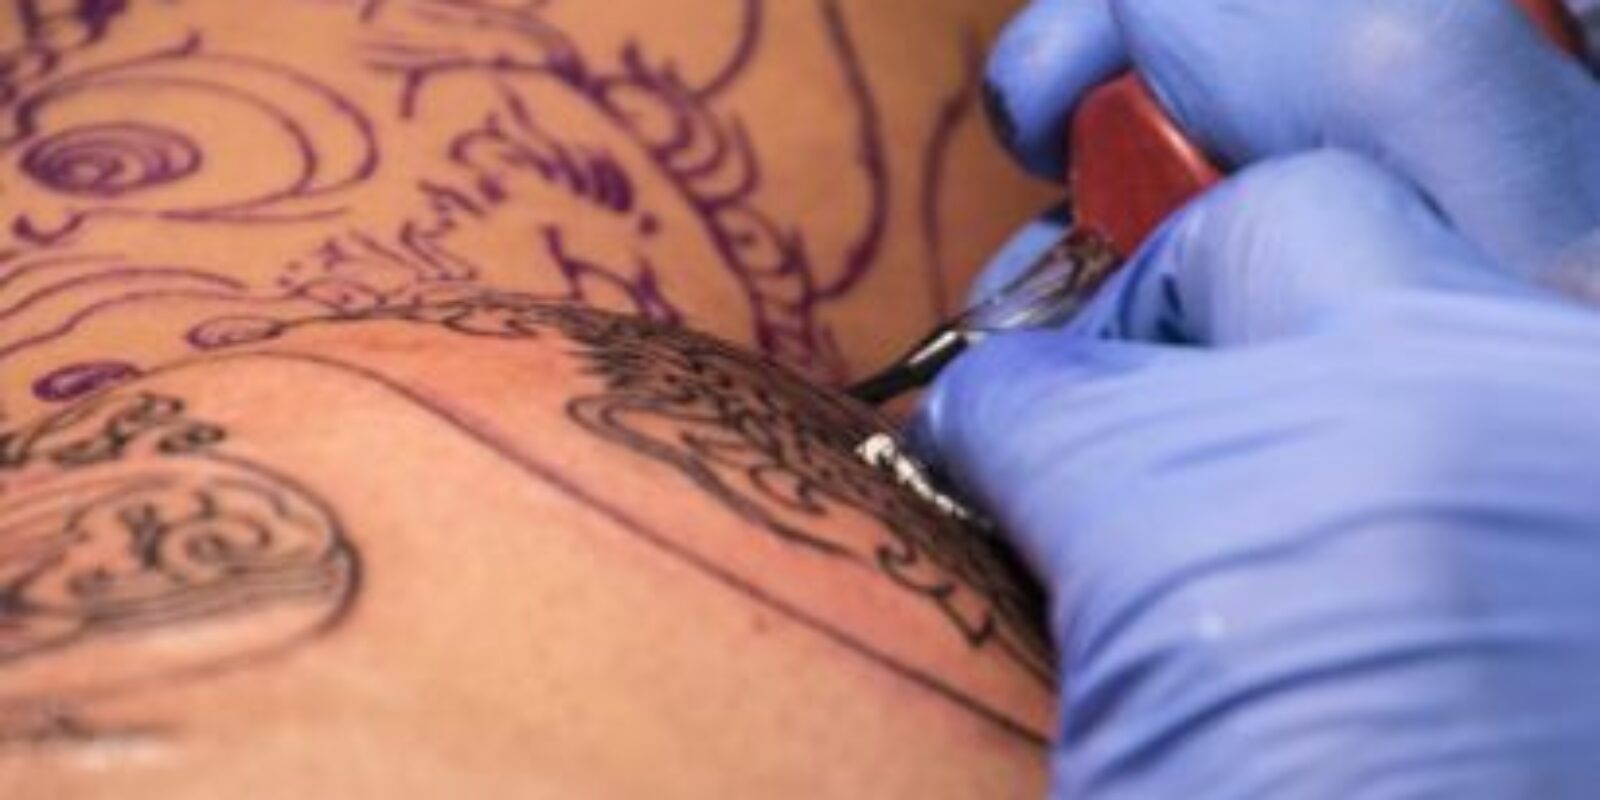 Best Tattoo Shops – What You Need to Know